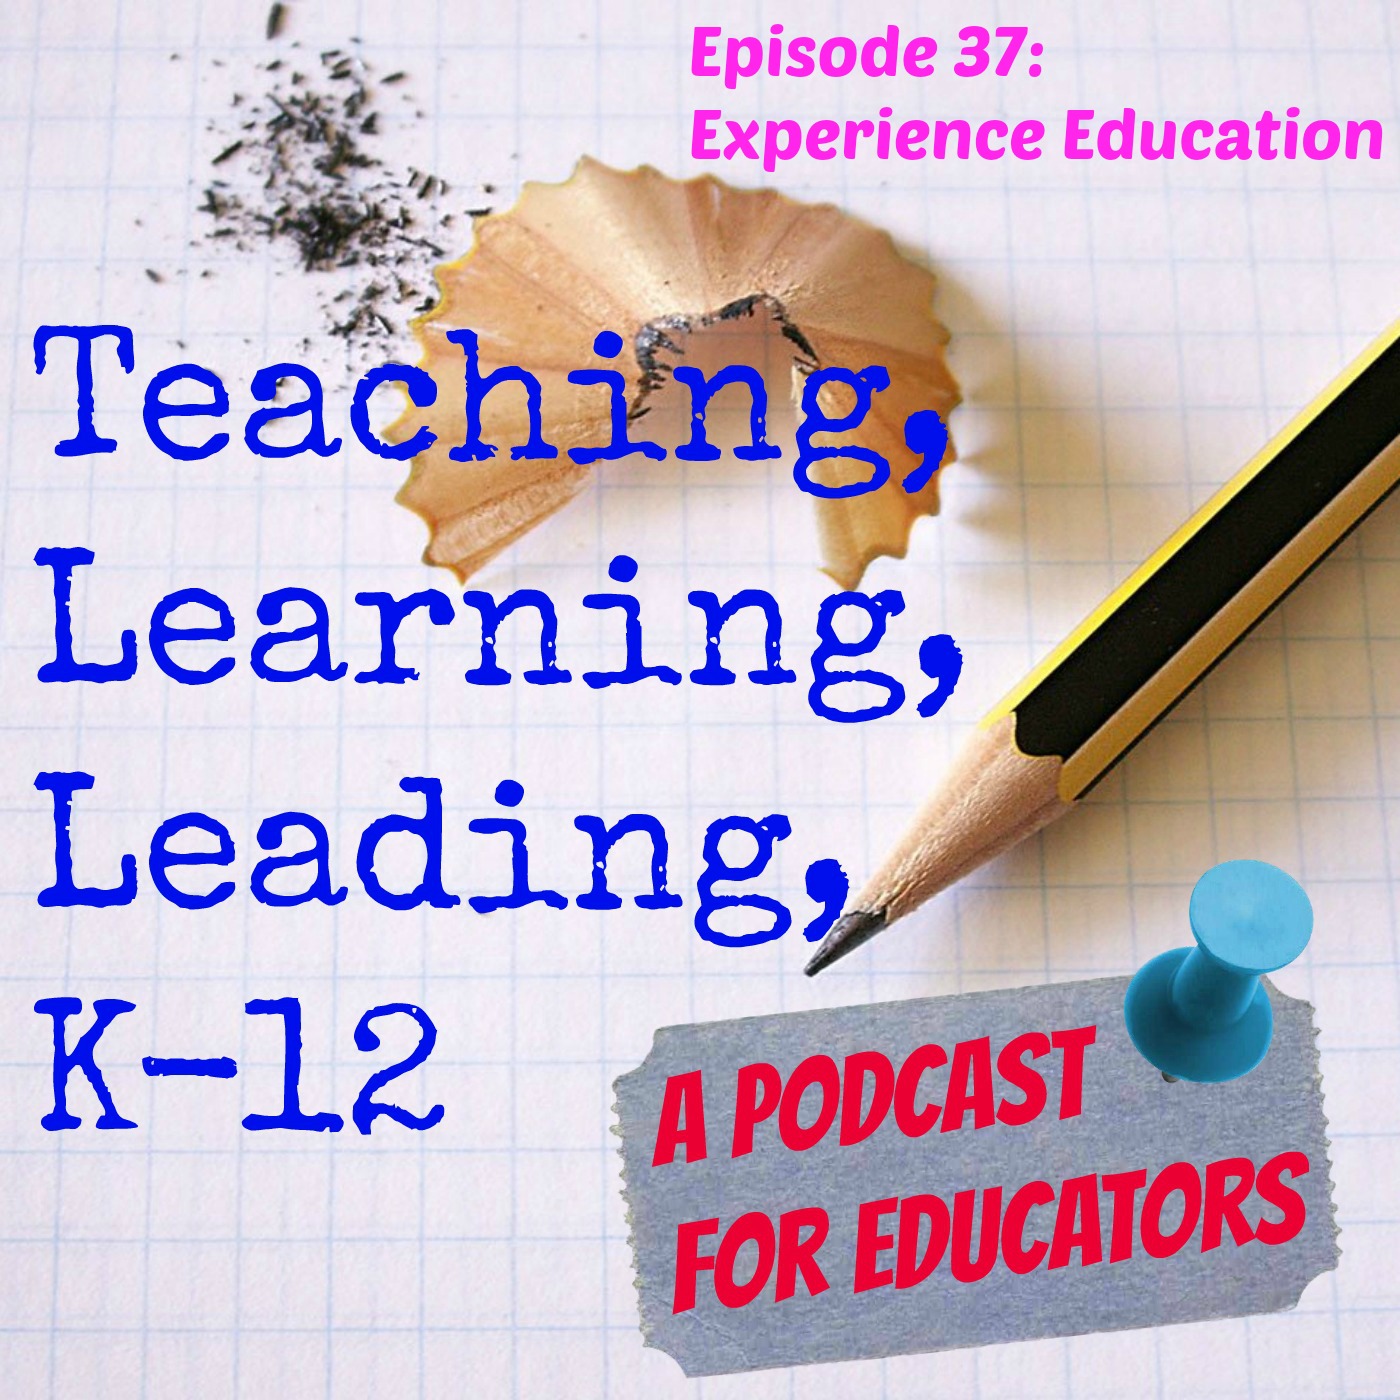 Episode 37: Experience Education